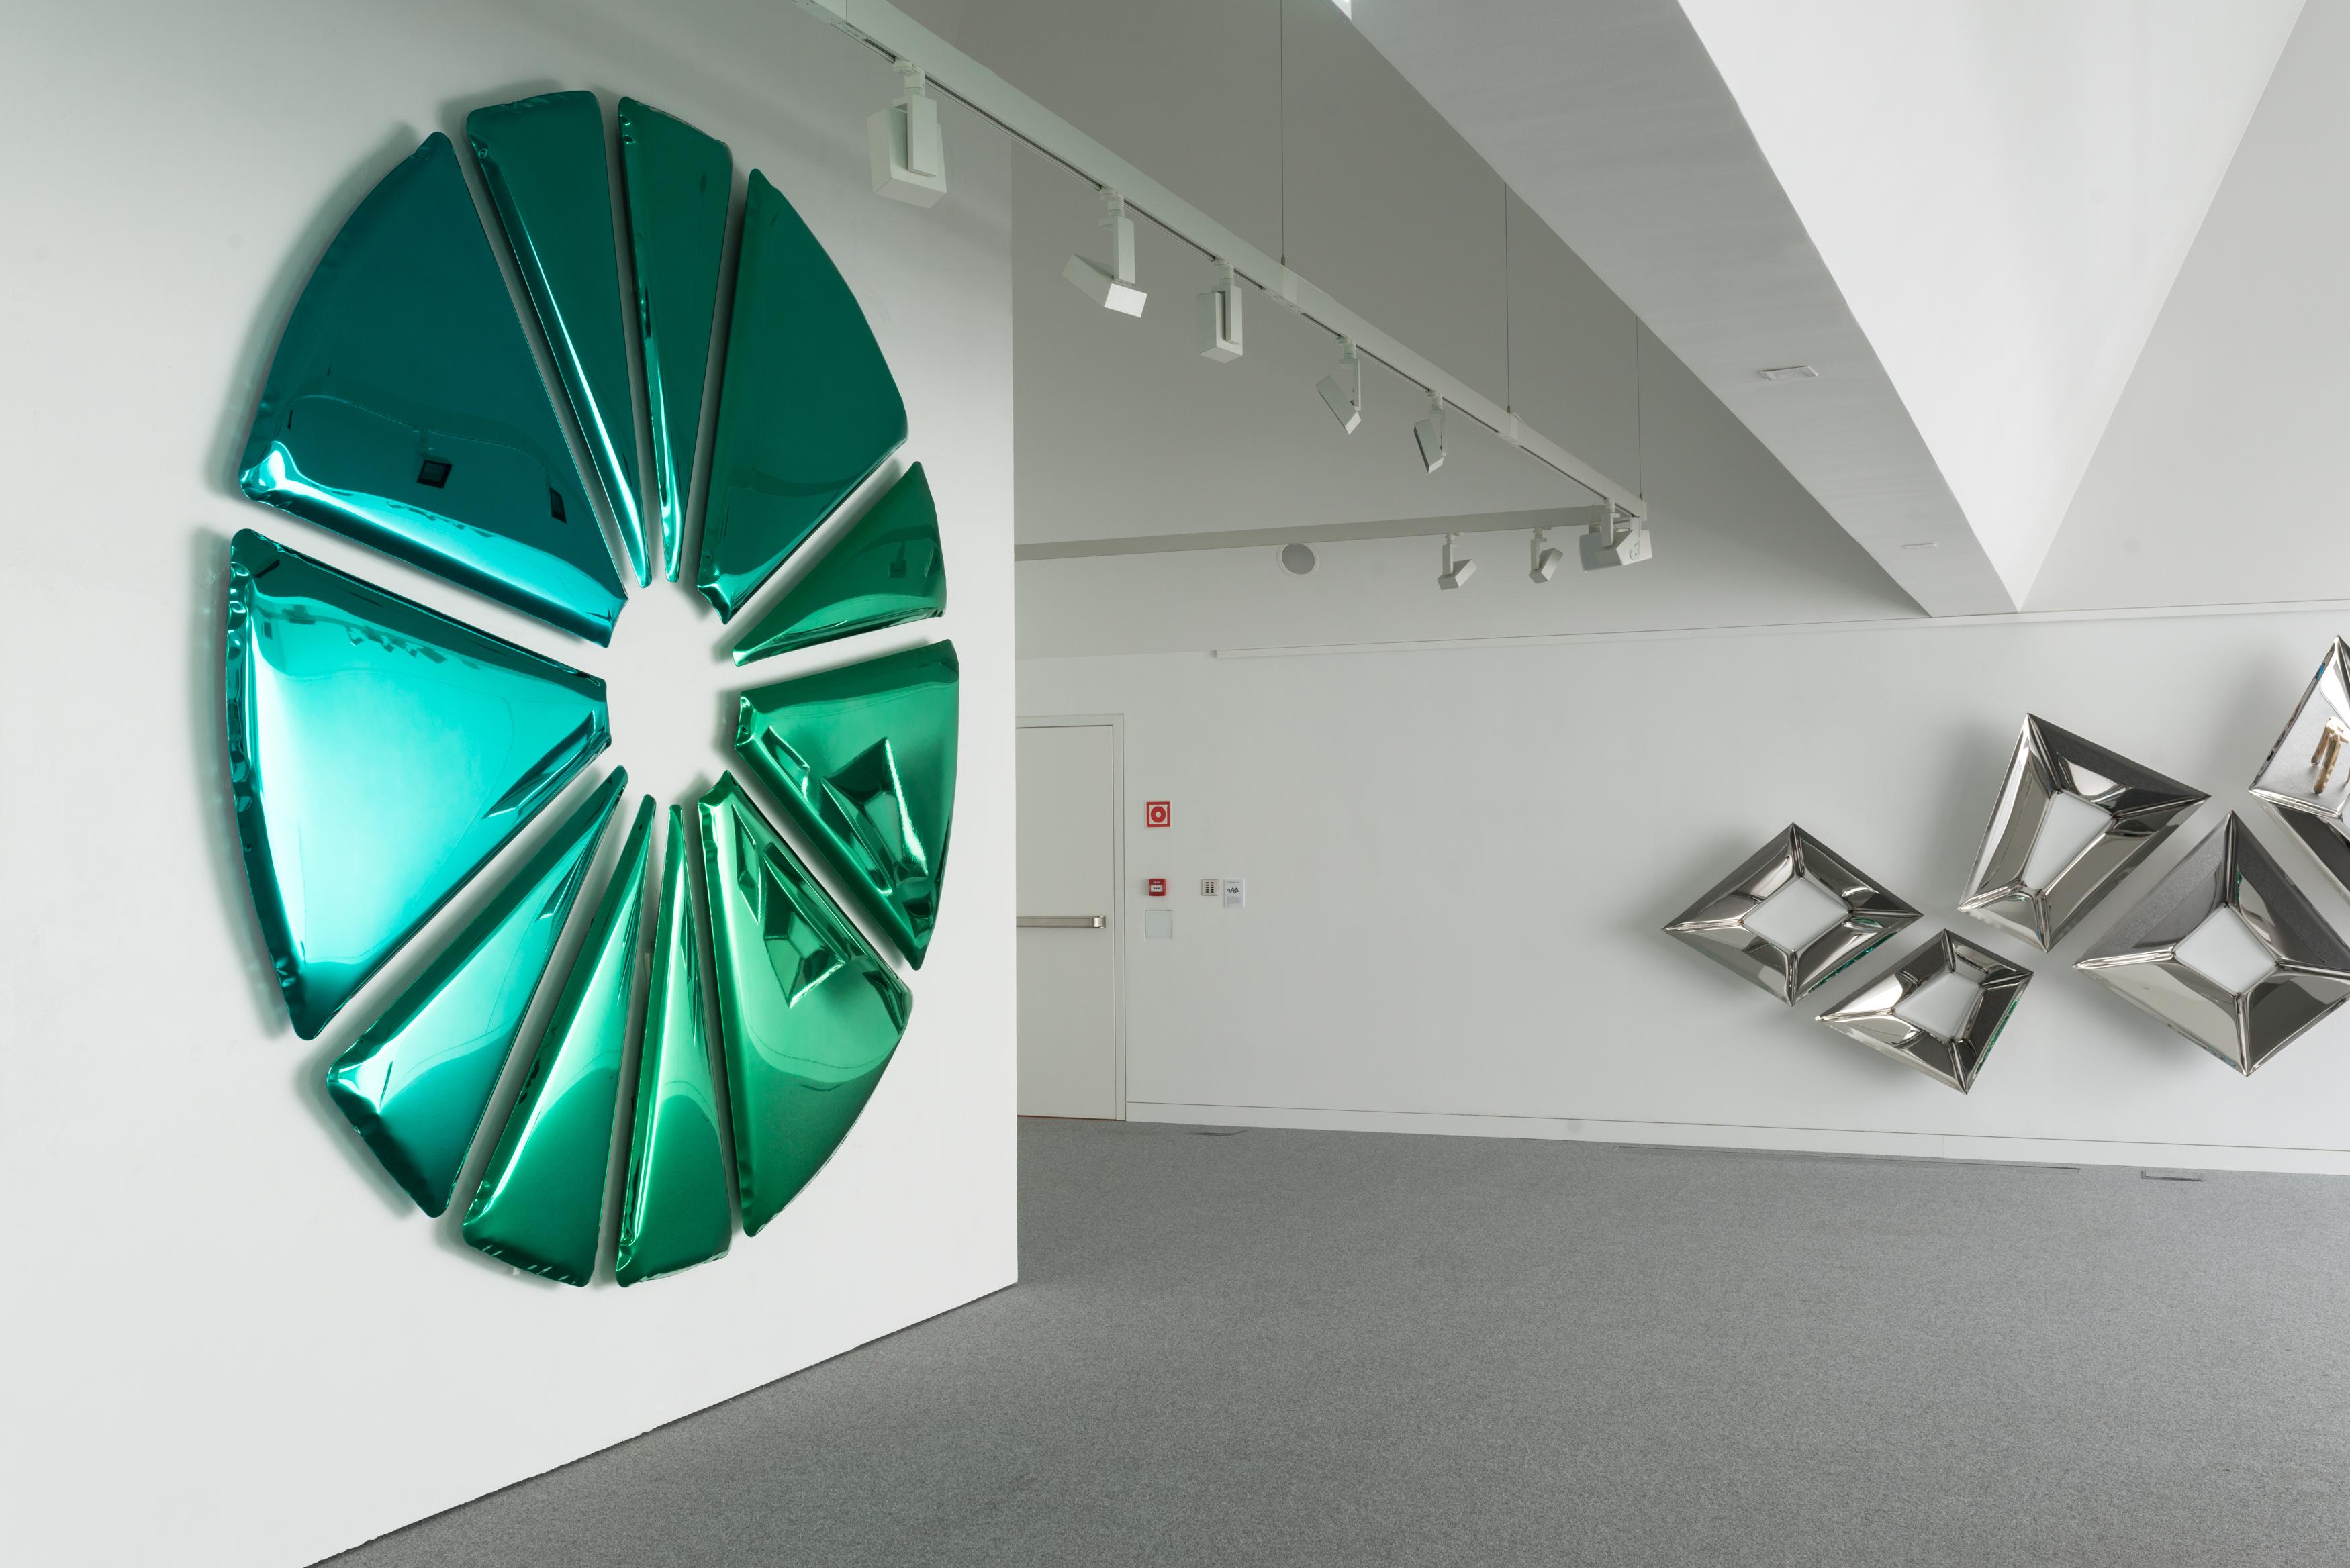 Oskar Zieta’s latest creation, the multi-element Nucleus mirror brings to mind an art installation rather than a mirror. It consists of several elements made of polished stainless steel covered with a color coating,
which creates a gradient